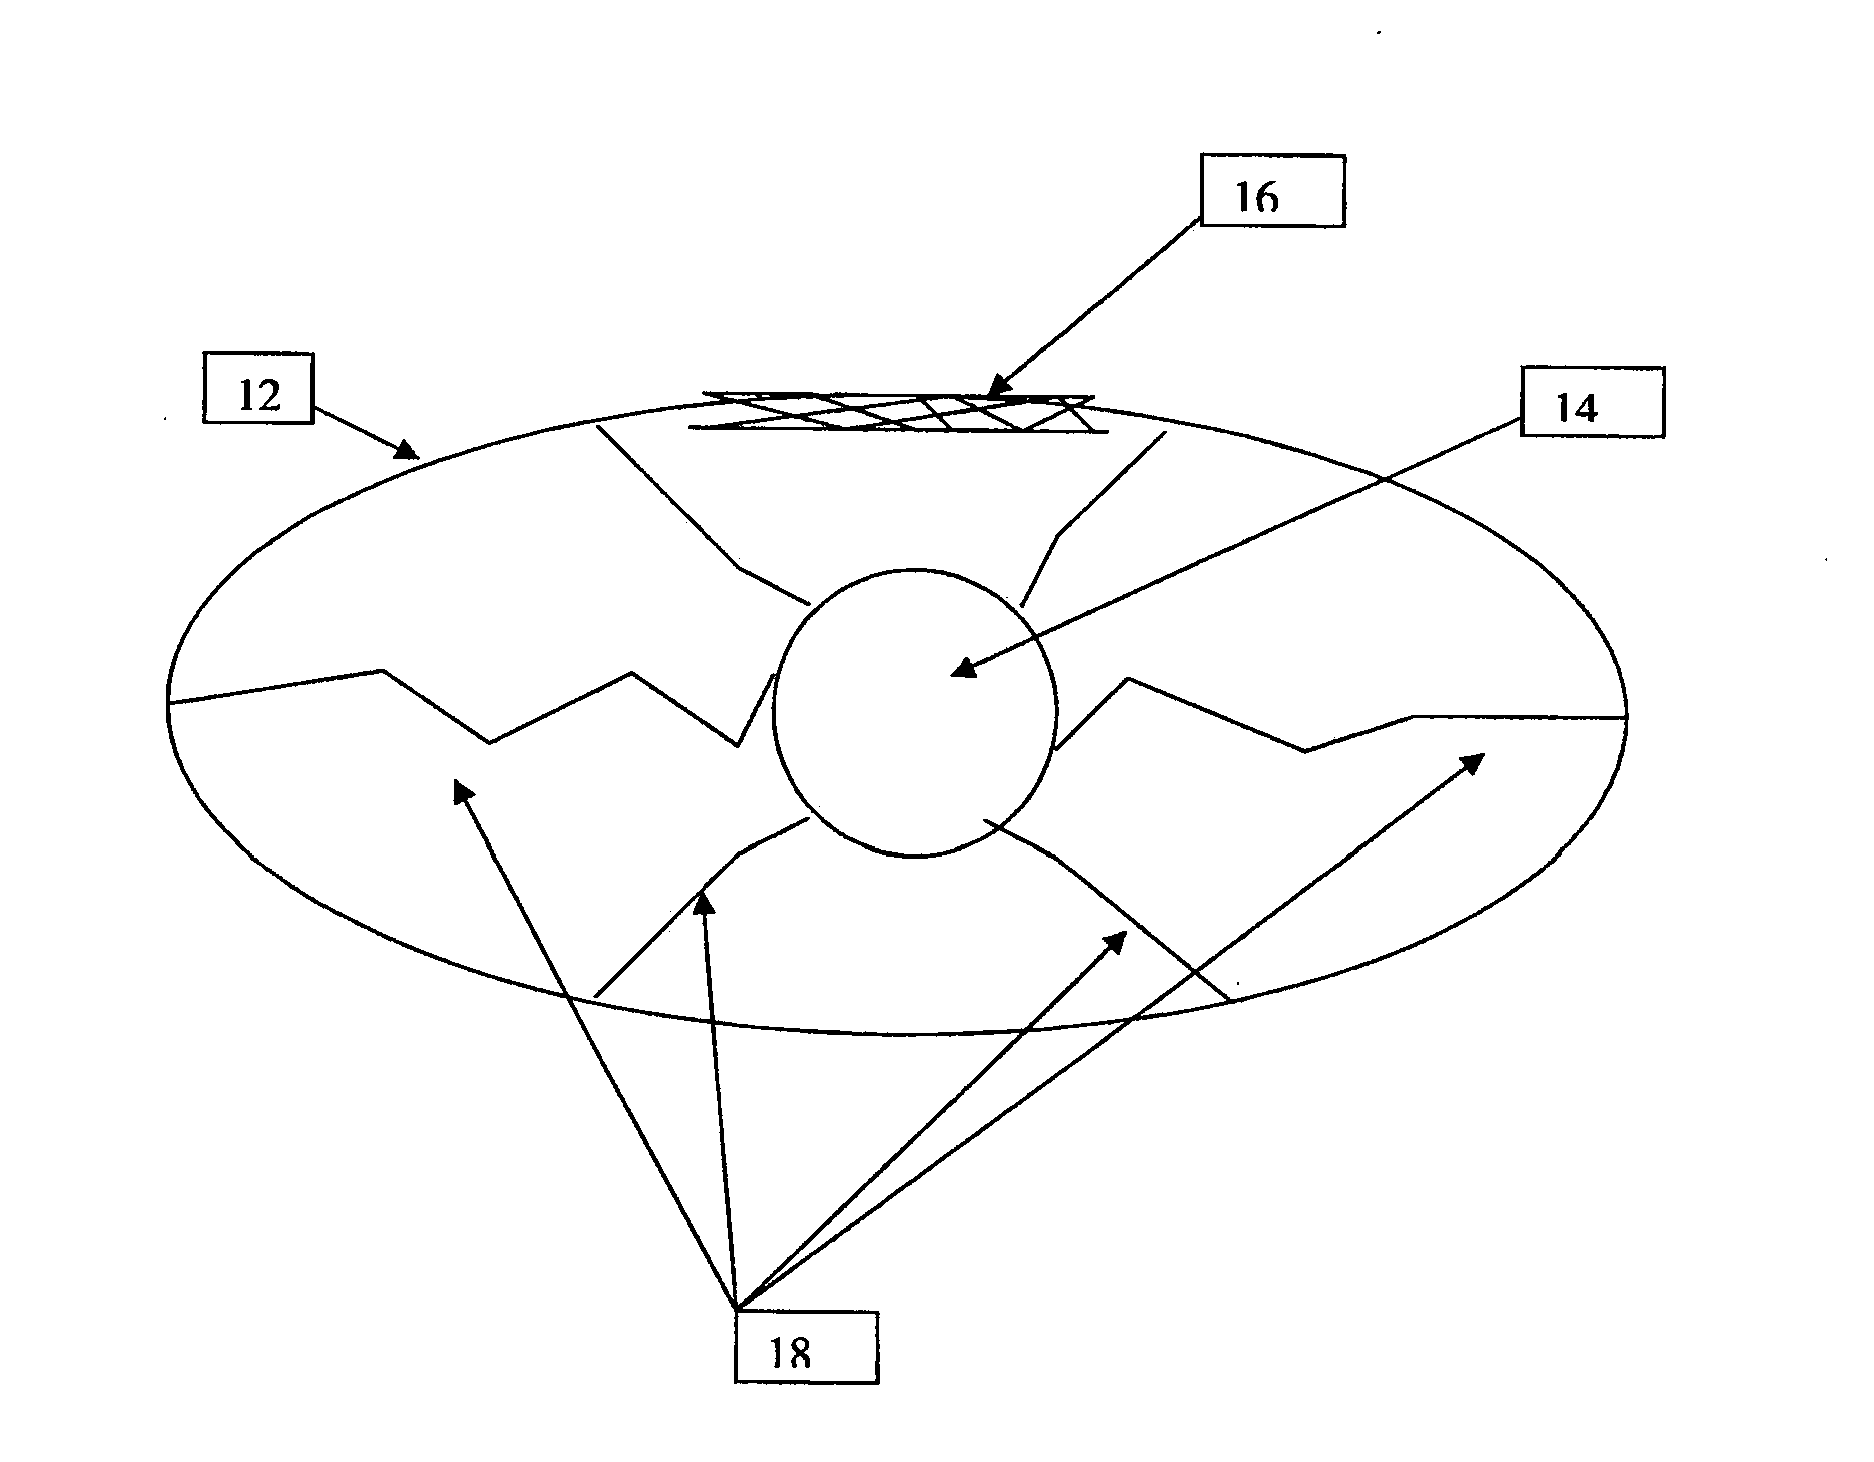 Electronics module support system for use with sports objects